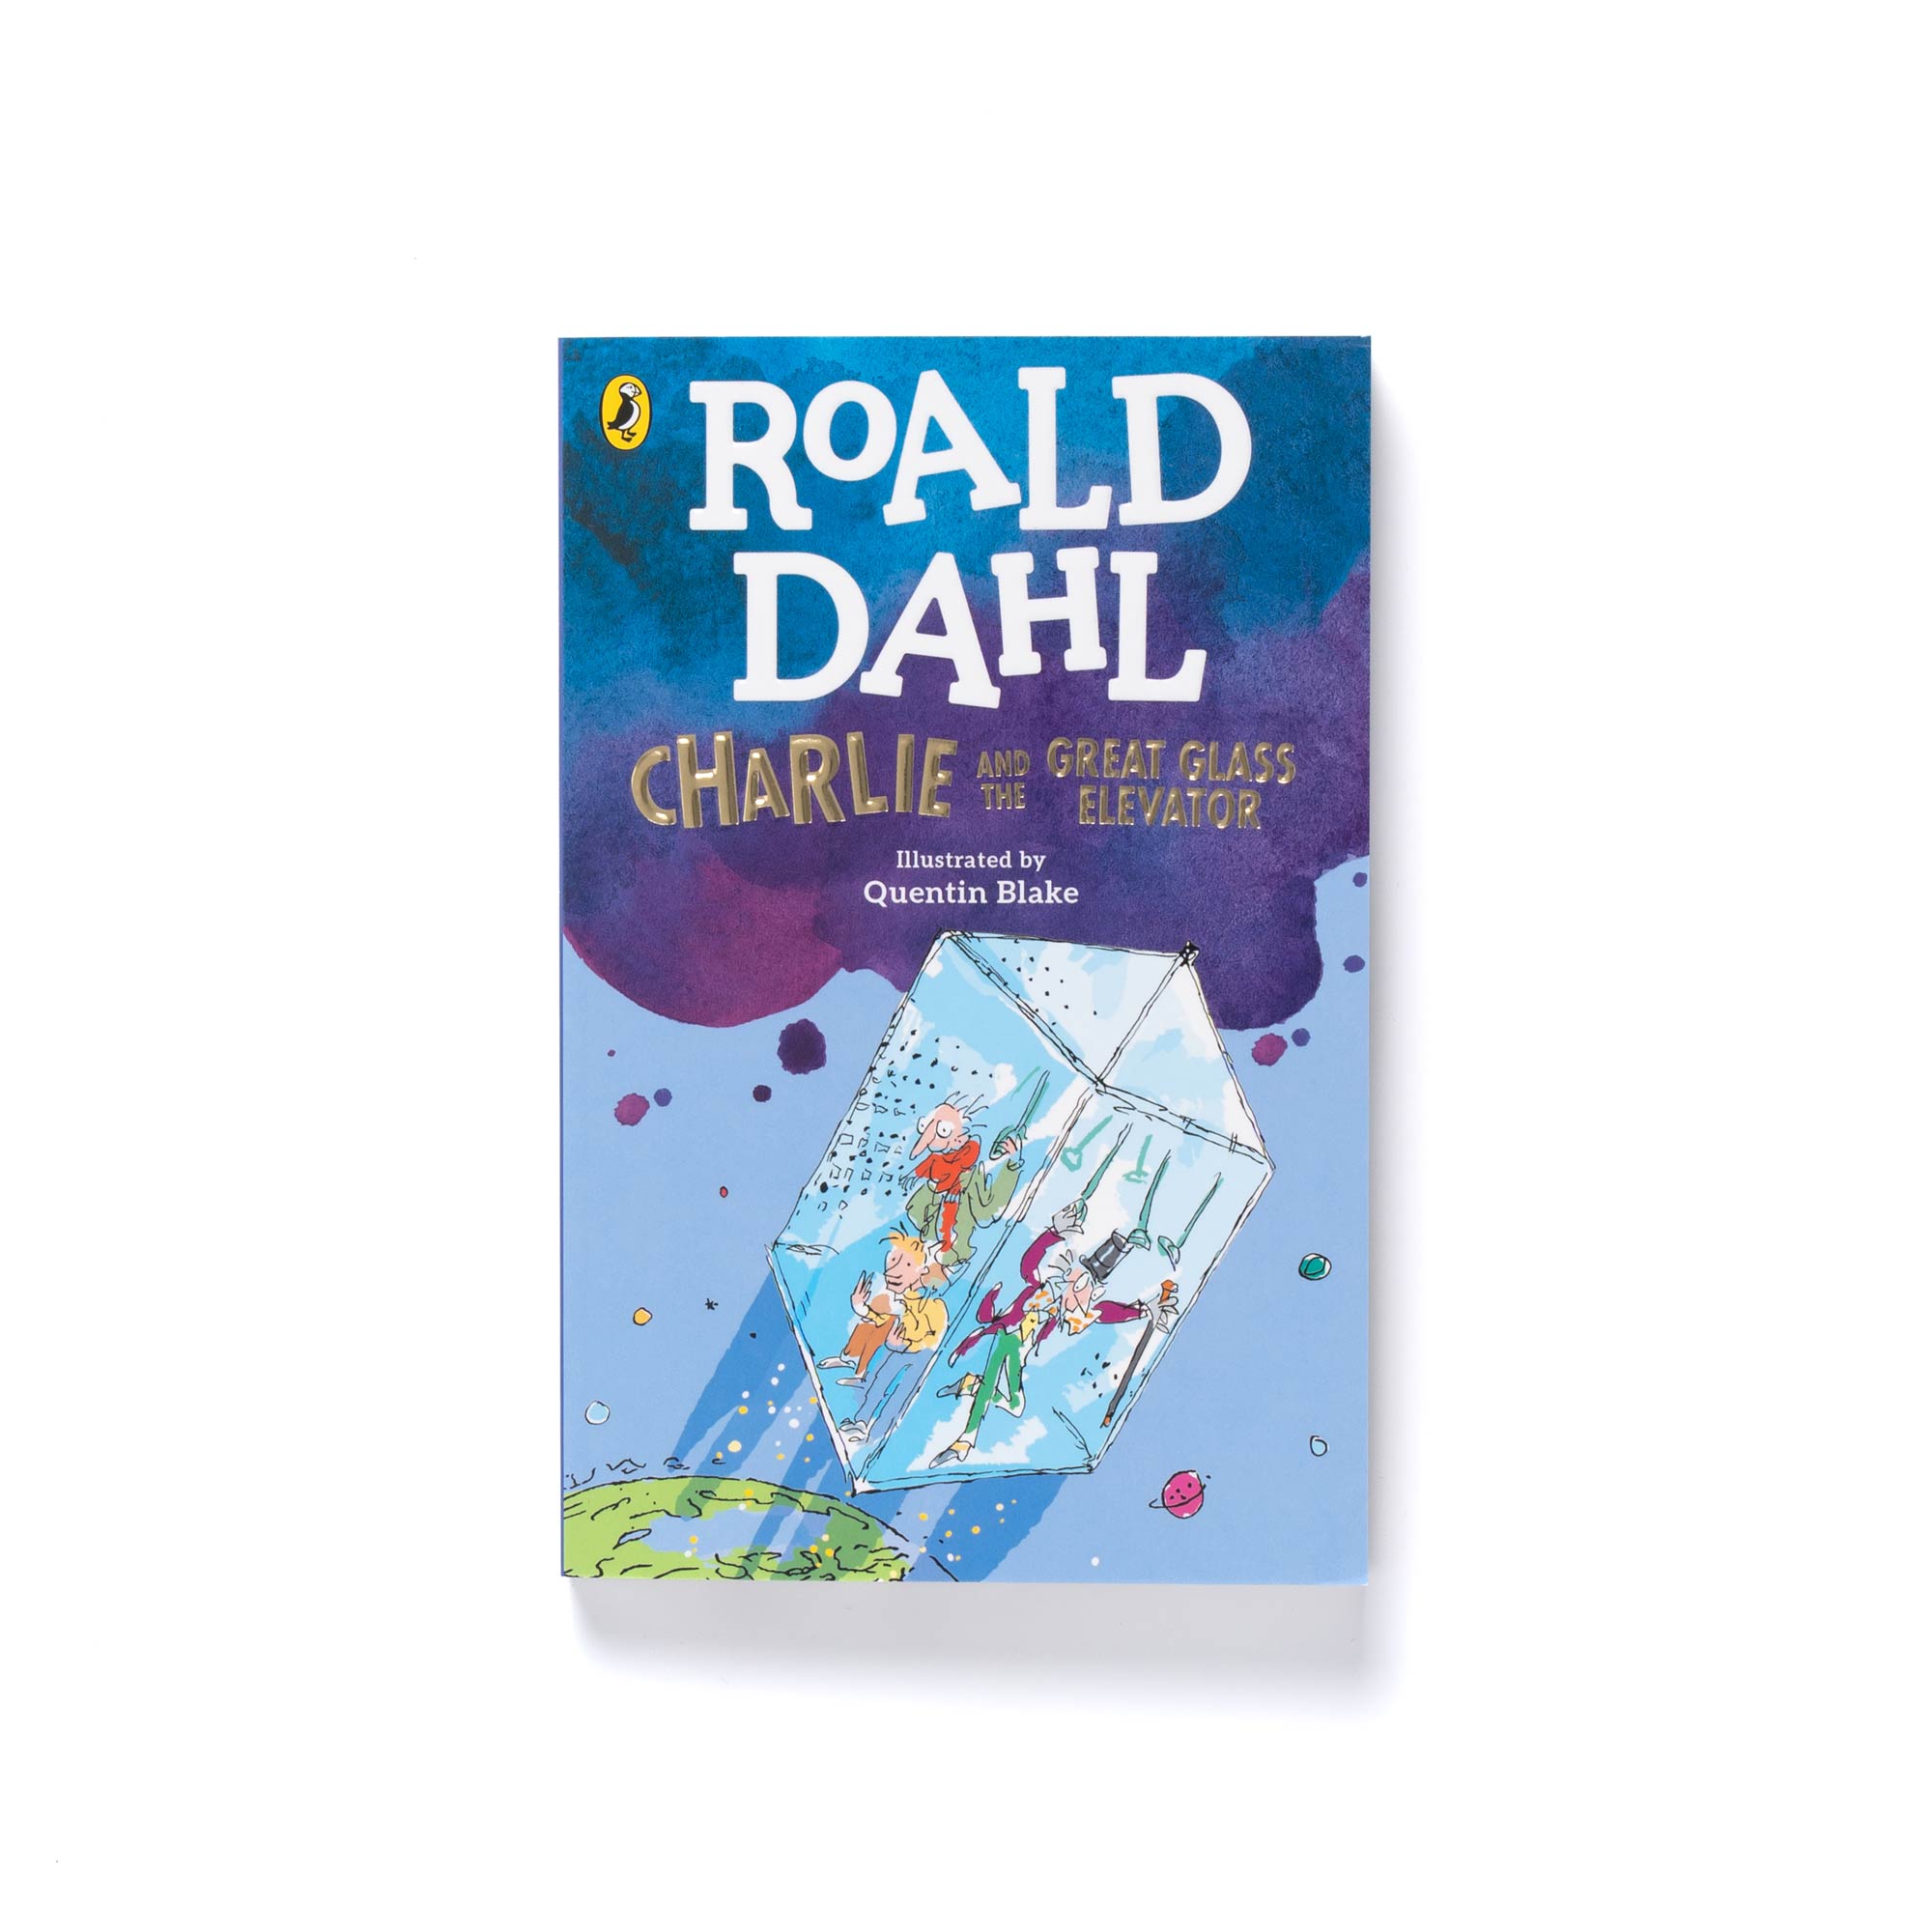 'Charlie　Great　and　the　Elevator'　Glass　Boys　Book　Roy's　Roald　Dahl's